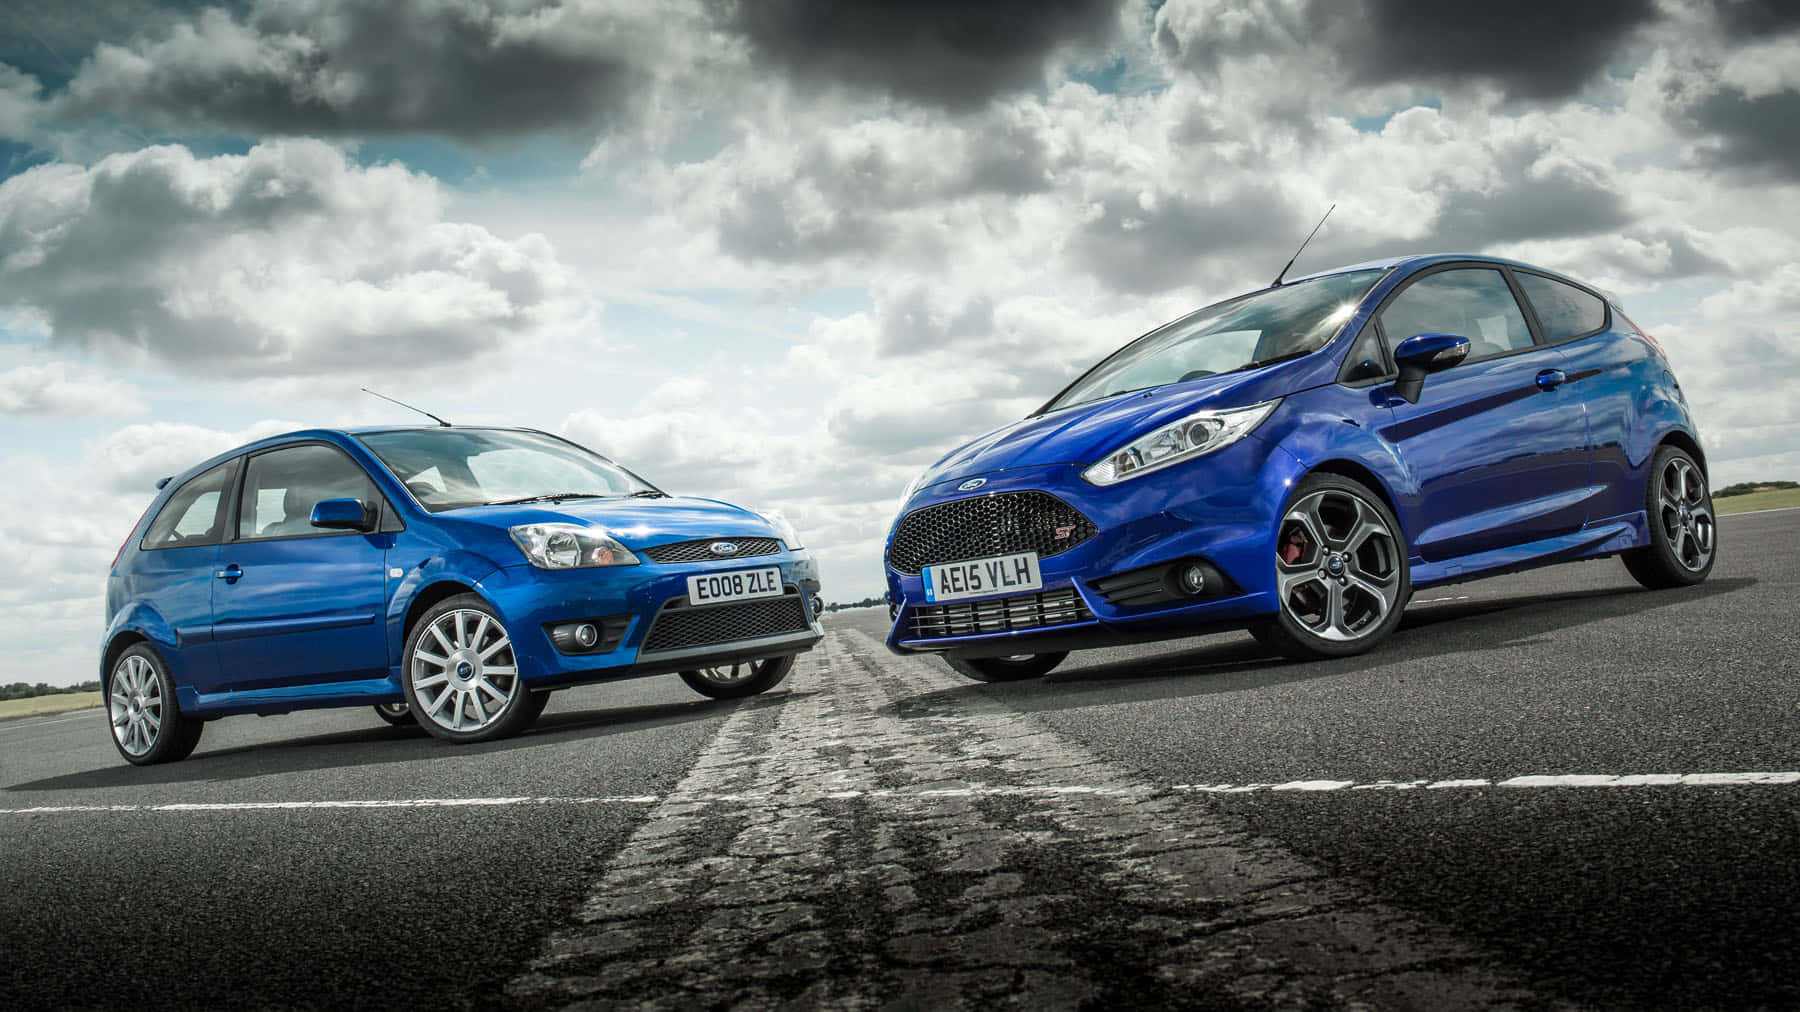 Stylish Ford Fiesta on a Scenic Road Wallpaper